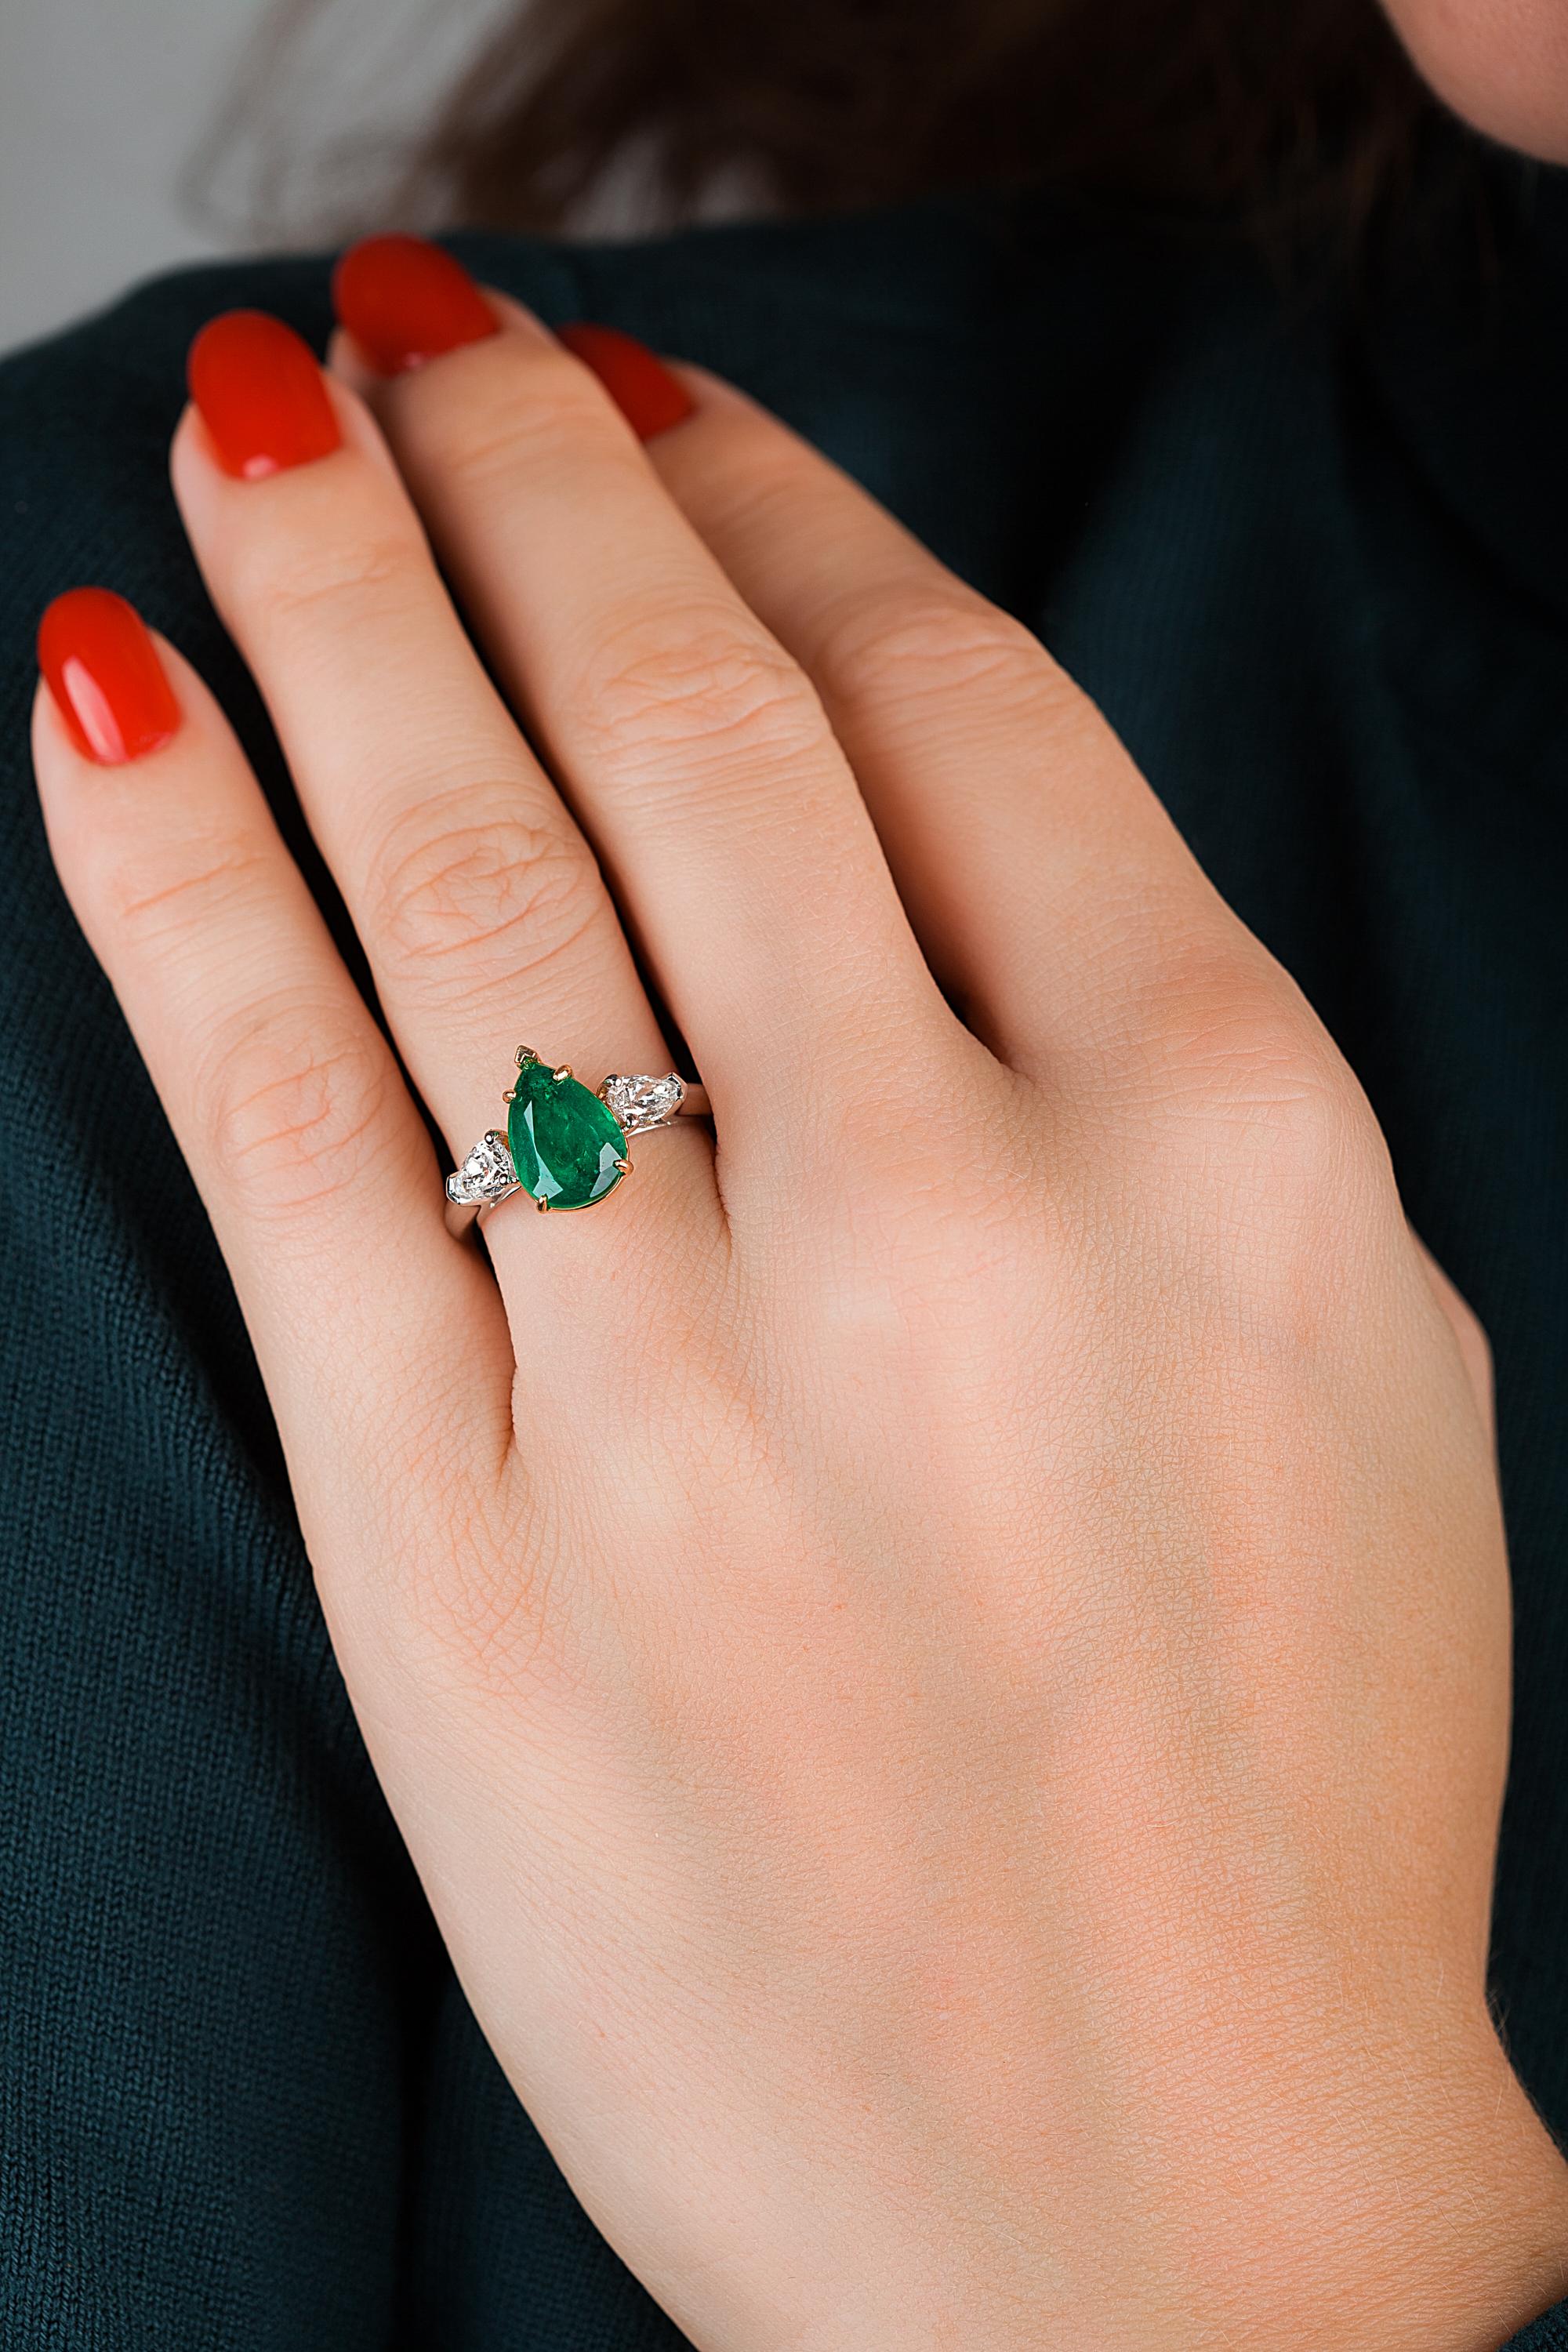 Showcasing a pear shape 2.42ct Genuine Emerald certified by C.Dunaigre as Zambian origin. The color has been certified as Vivid green, the most desirable color in emeralds. Based on emerald grading methodology the clarity of the emerald is